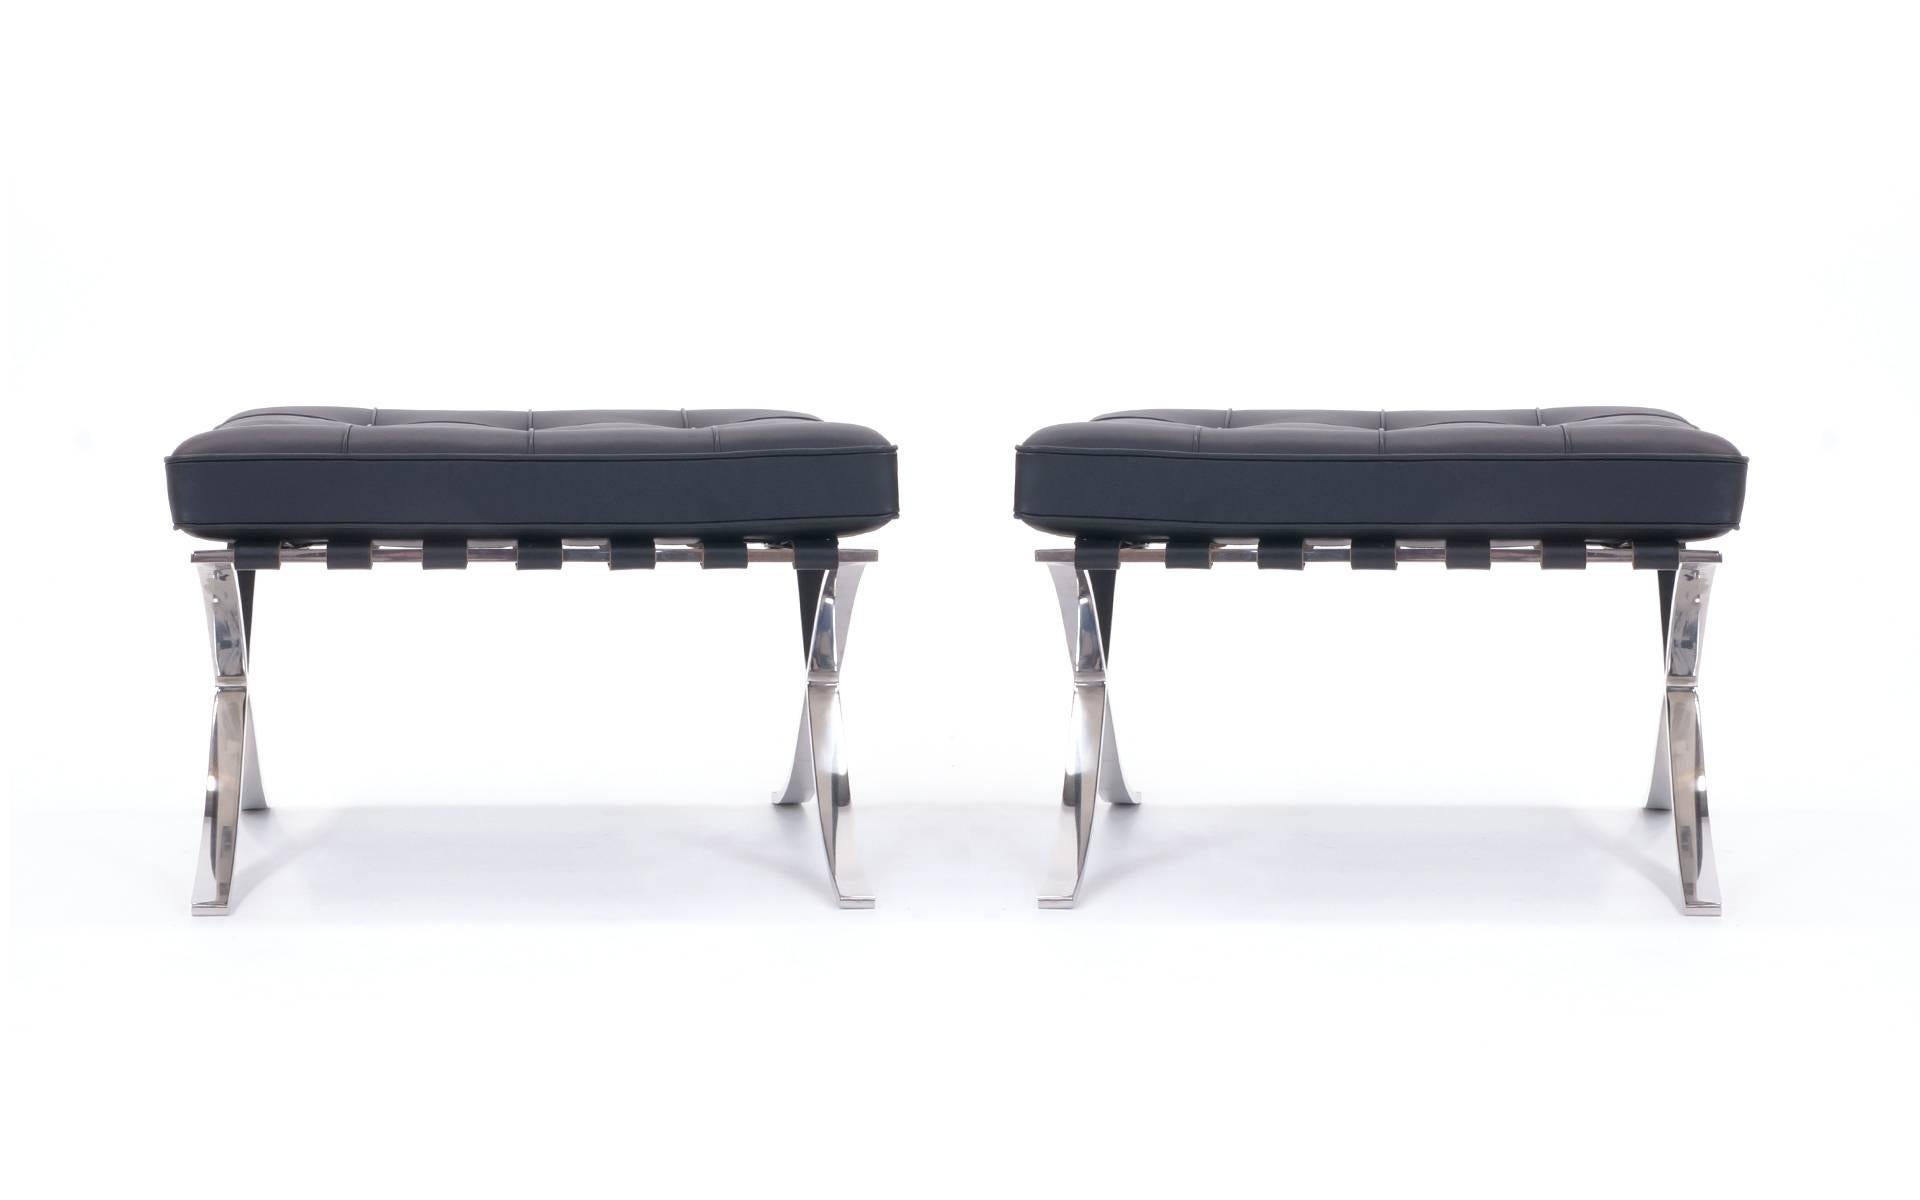 Mid-Century Modern Pair of Authentic Stainless Steel Barcelona Stools / Ottomans for Knoll. As new